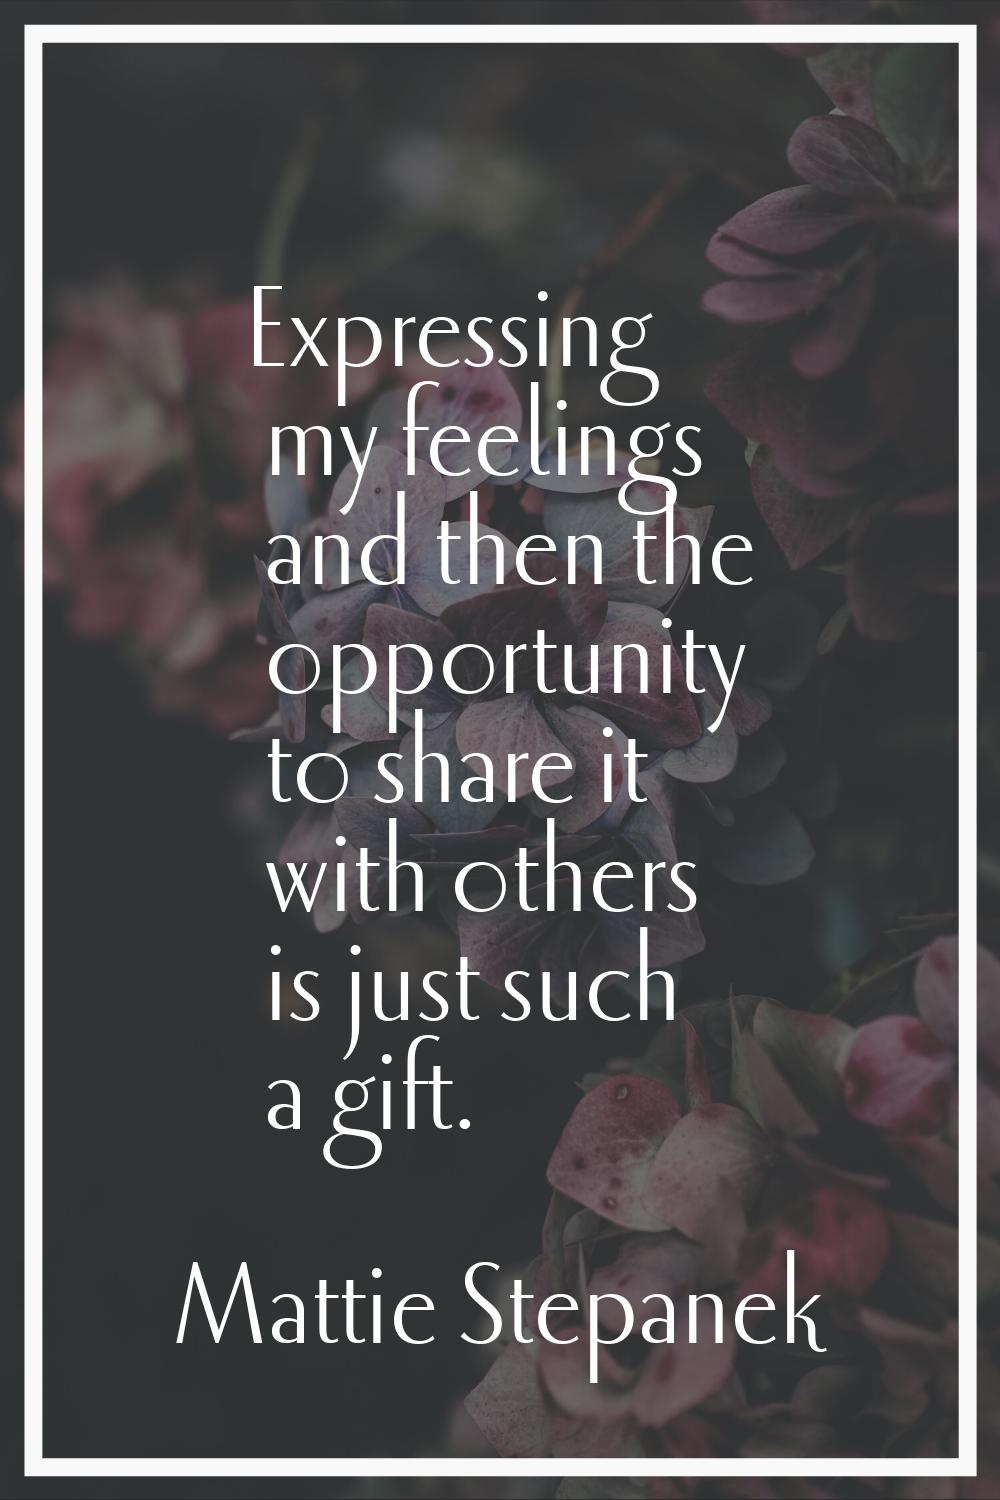 Expressing my feelings and then the opportunity to share it with others is just such a gift.